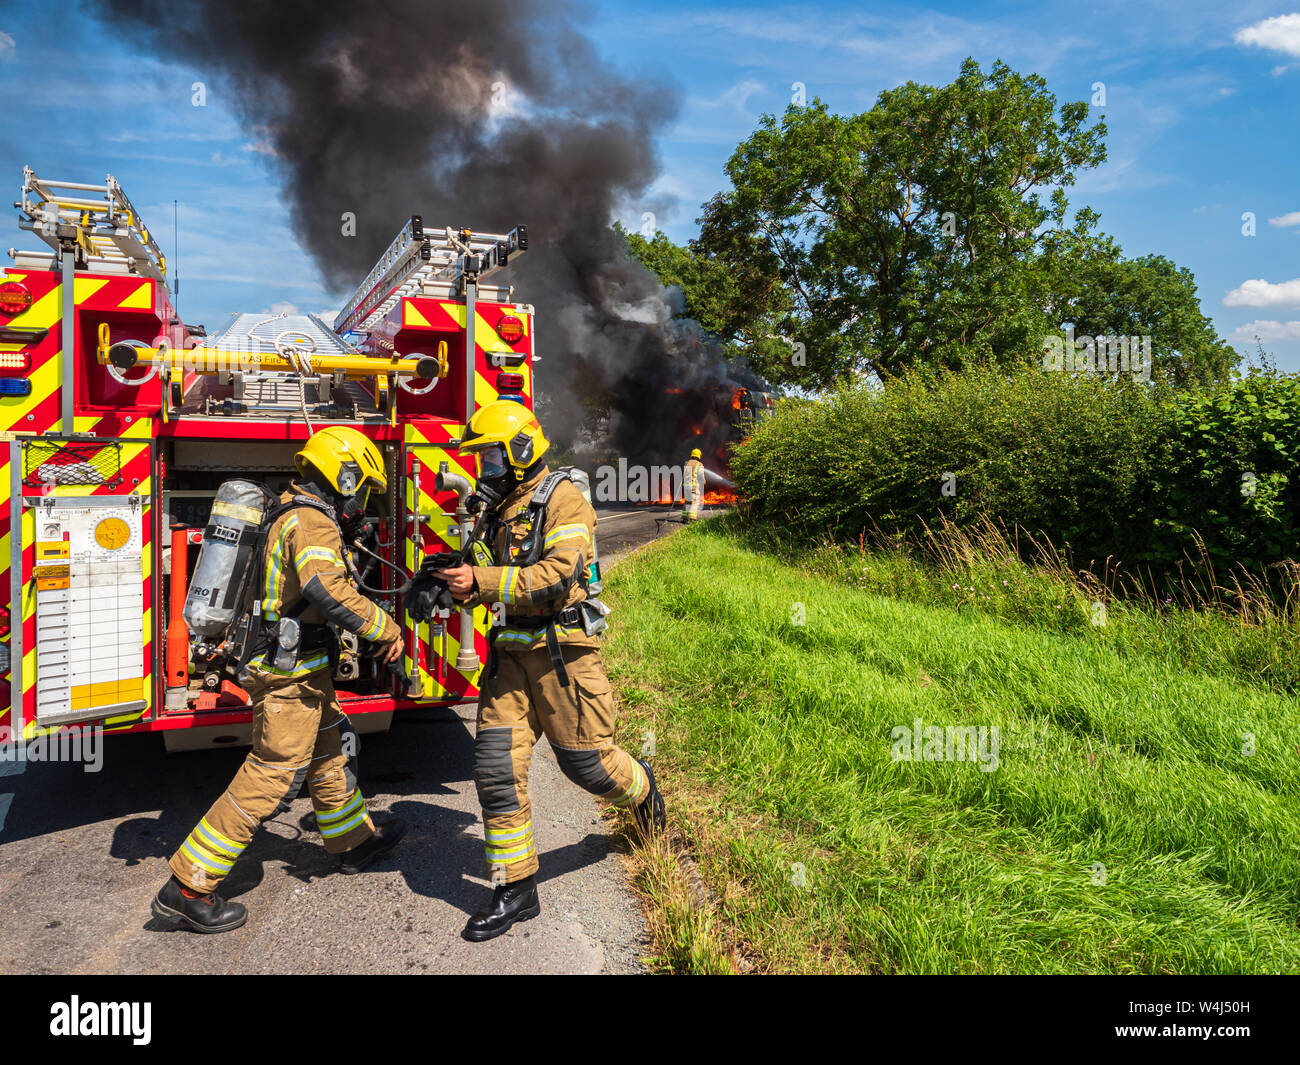 Firefighters from Lincolnshire Fire and Rescue wearing breathing apparatus in action at the scene of major vehicle fire involving a Combine harvester Stock Photo